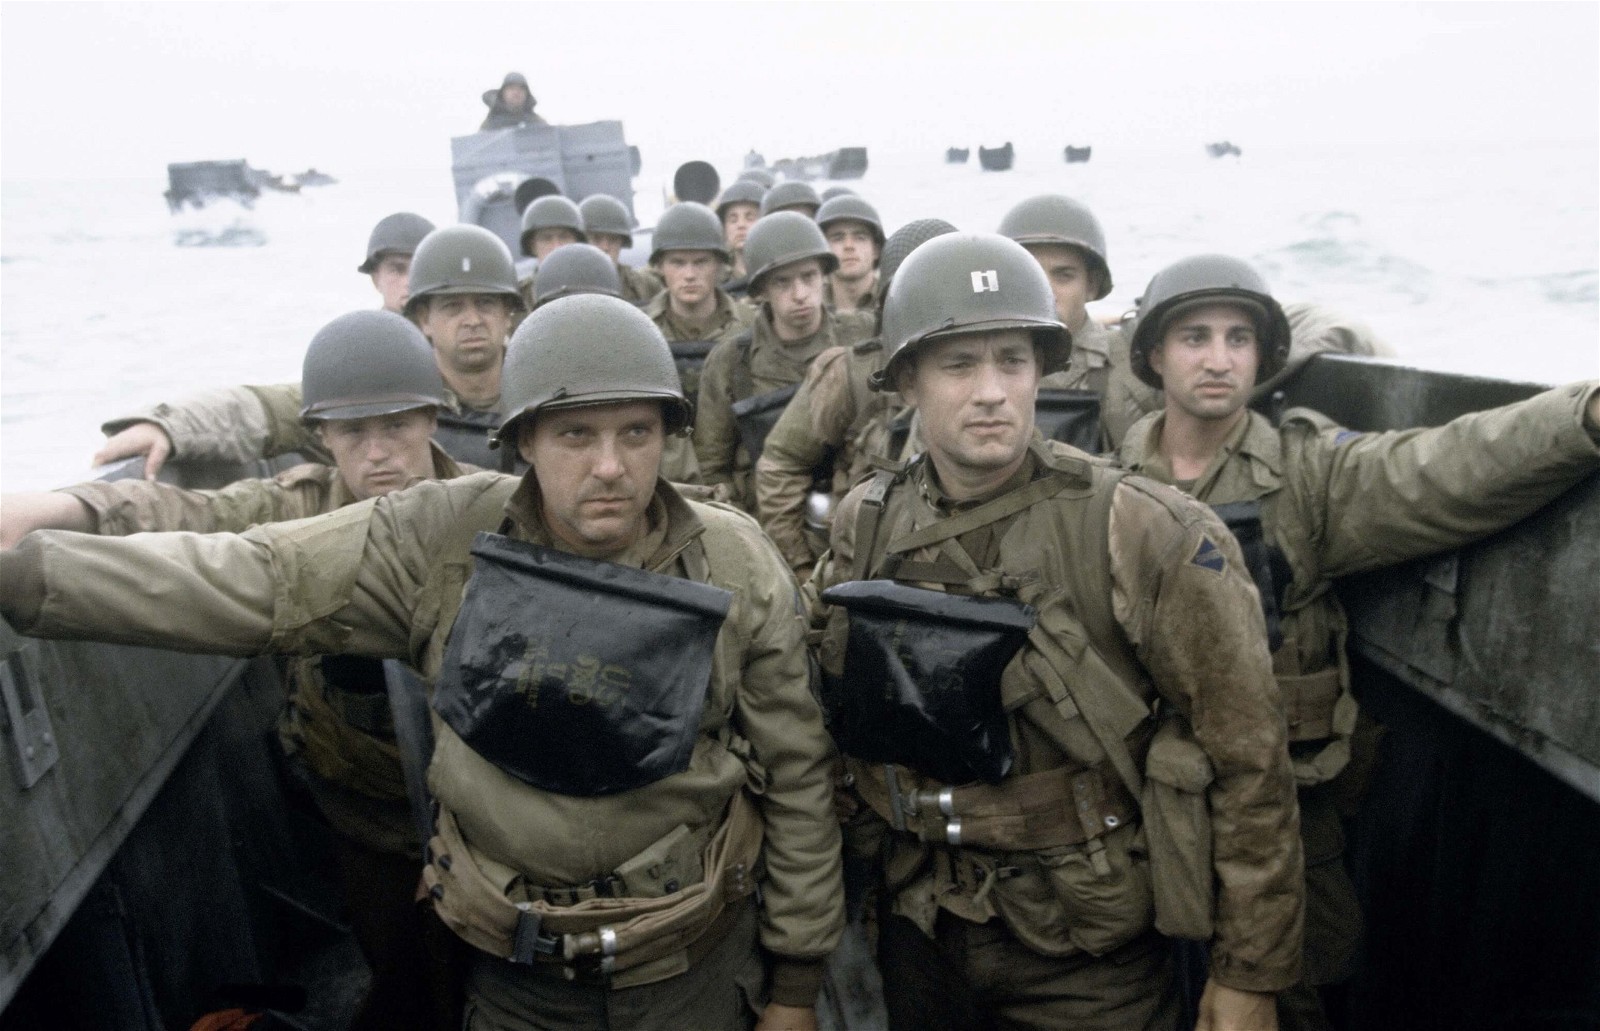 A still from Saving Private Ryan